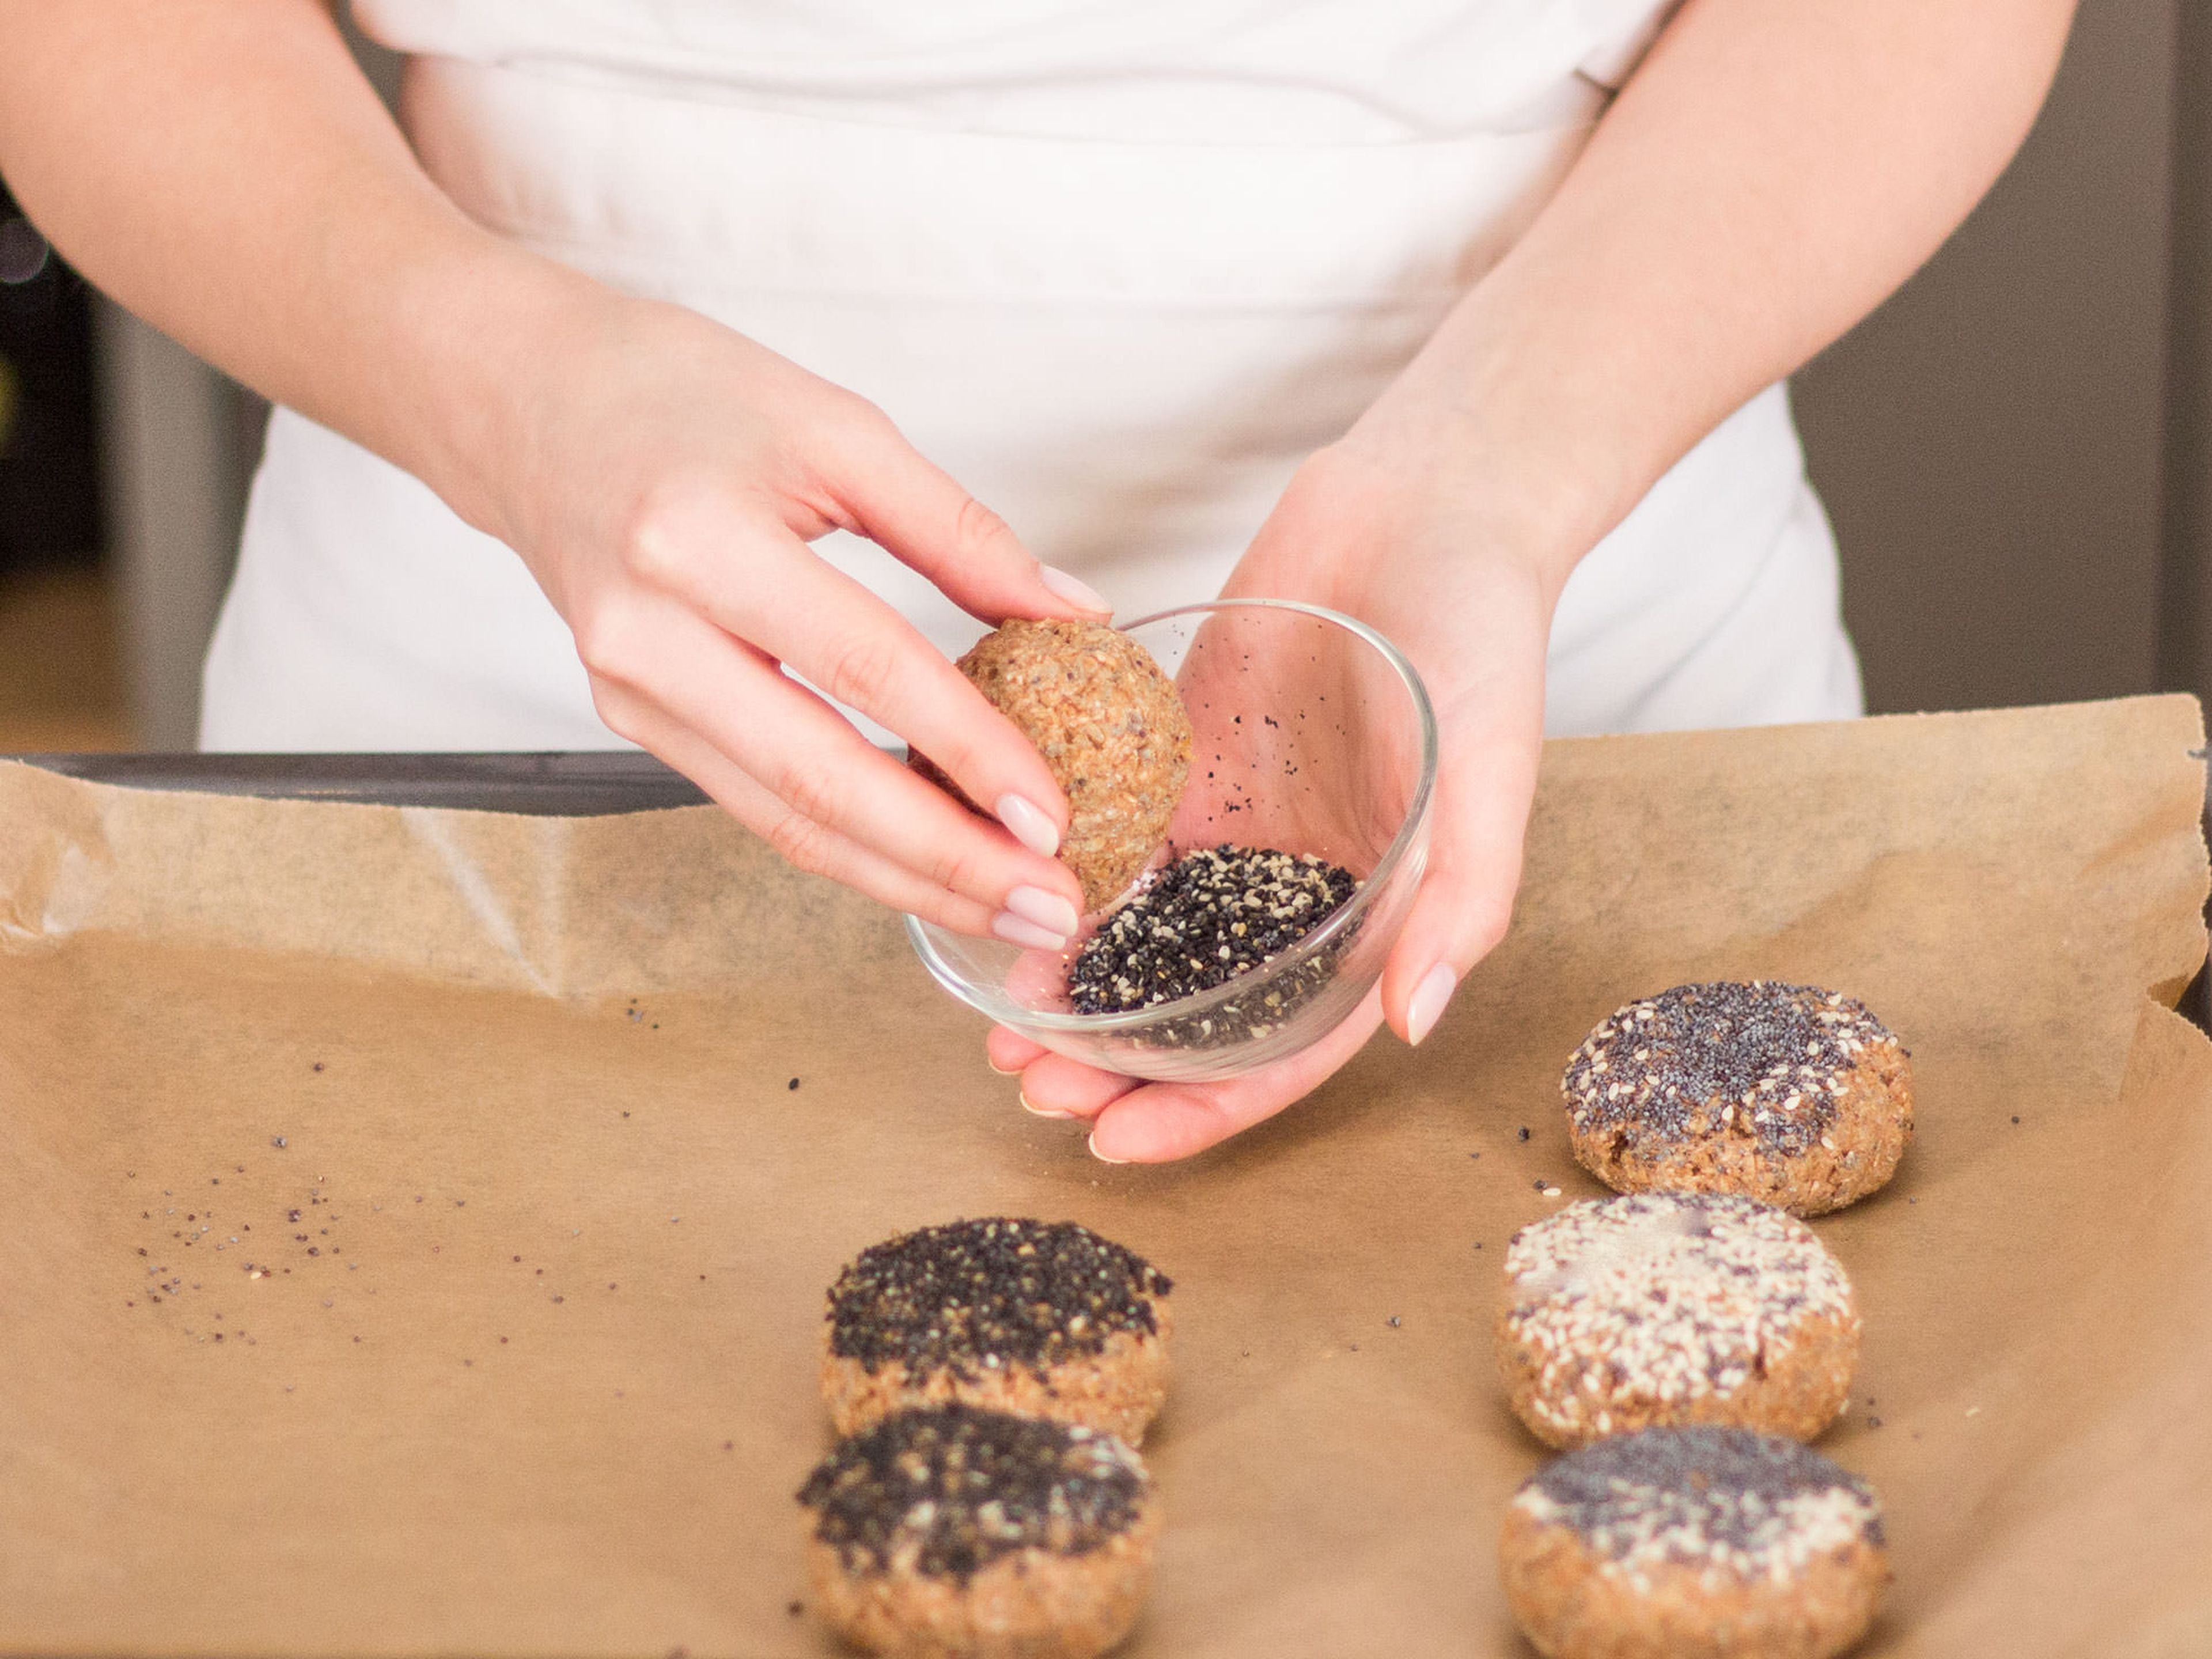 Form dough into balls and transfer to a parchment-lined baking sheet. Roll balls in black sesame, white sesame, or poppy seeds. Bake at 180°C/350°F for approx. 20 – 30 min. Enjoy!